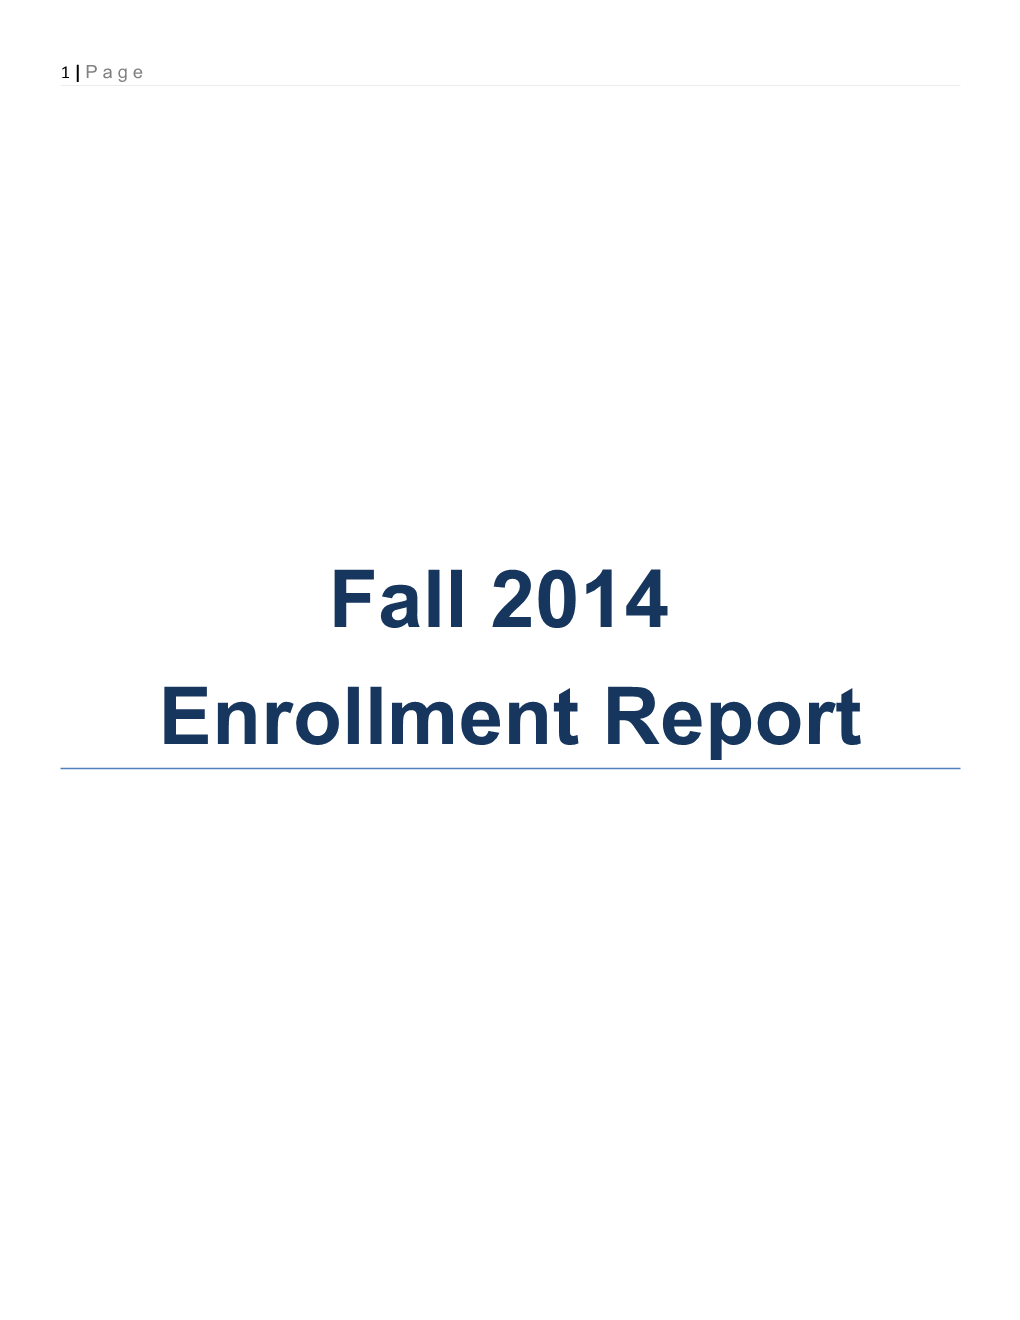 First Year Student Recruitment Goal for Fall 2014 Was 1650. Goal Missed by 17 Students